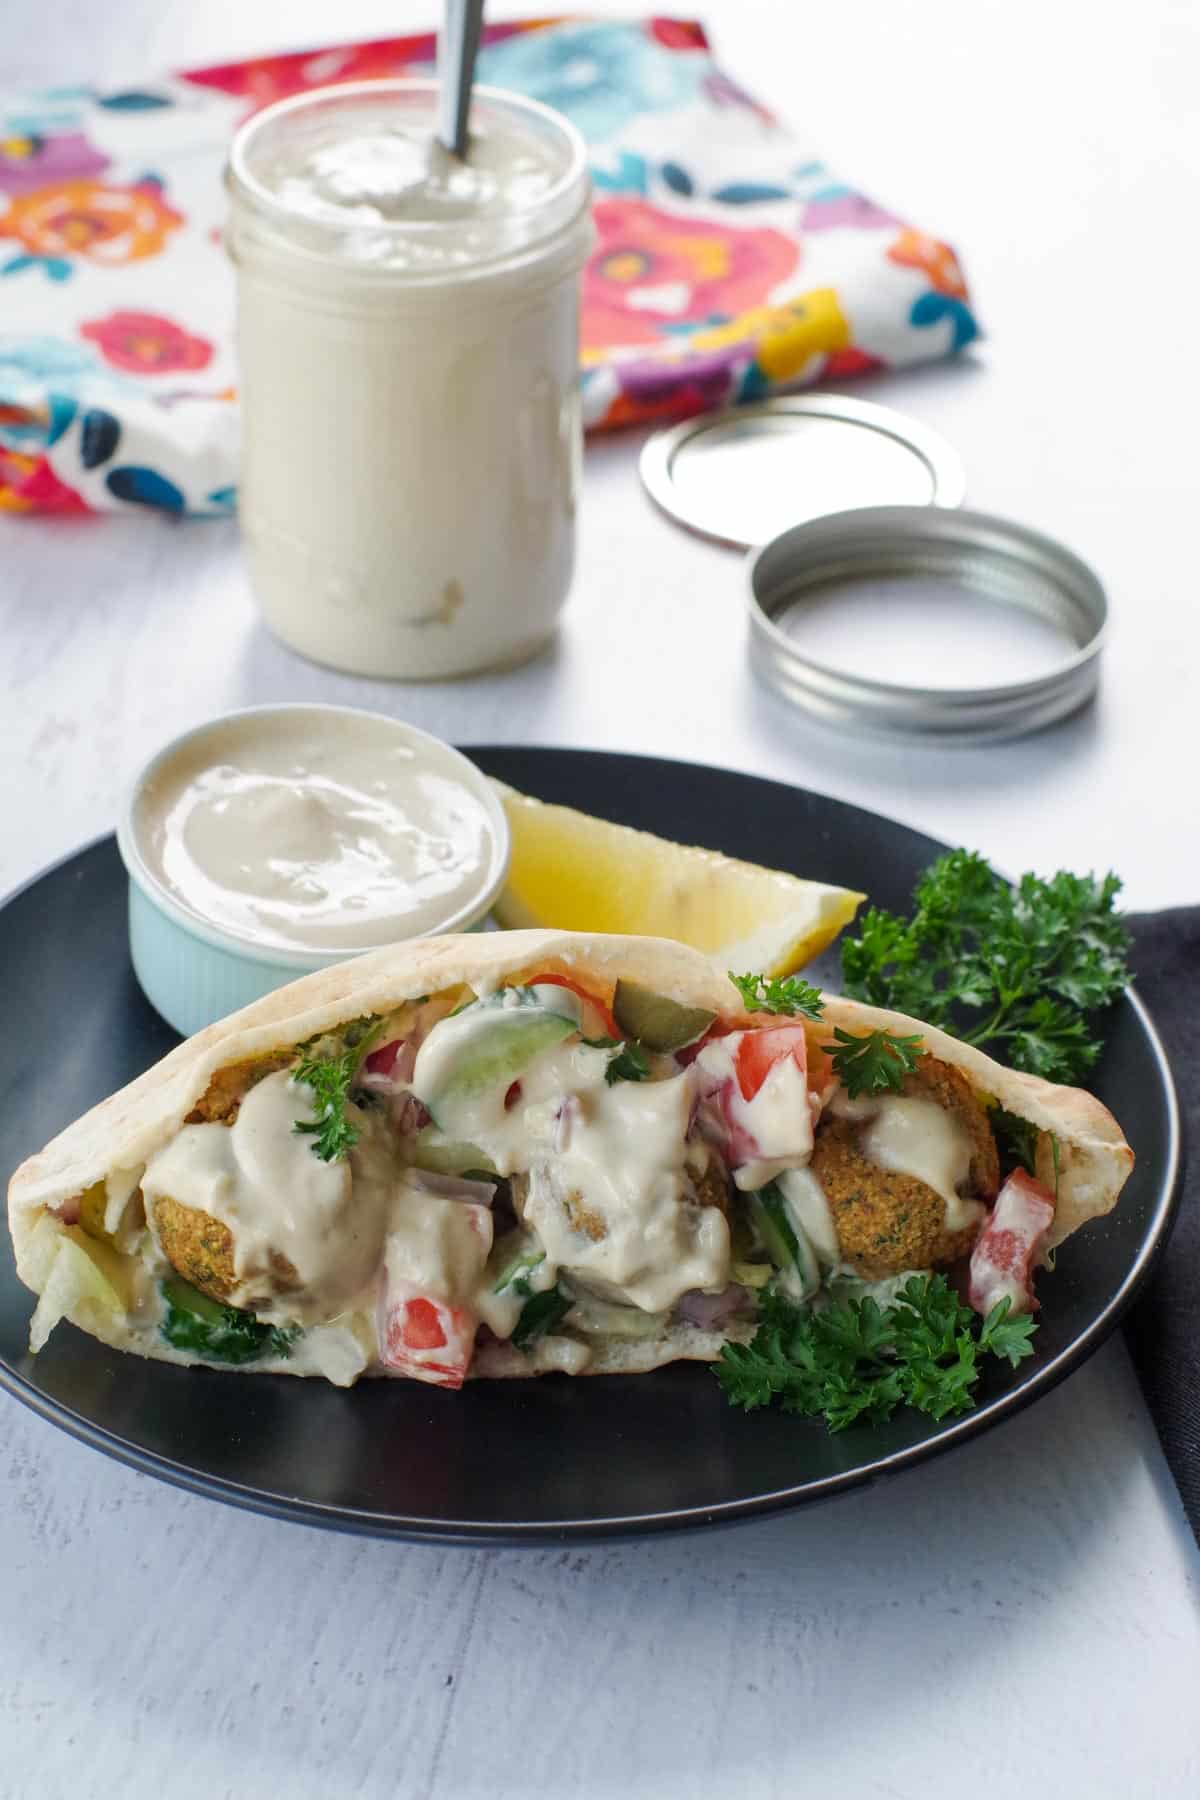 A falafel on a black plate, with a dish of tahini sauce and a jar of tahini sauce in the background